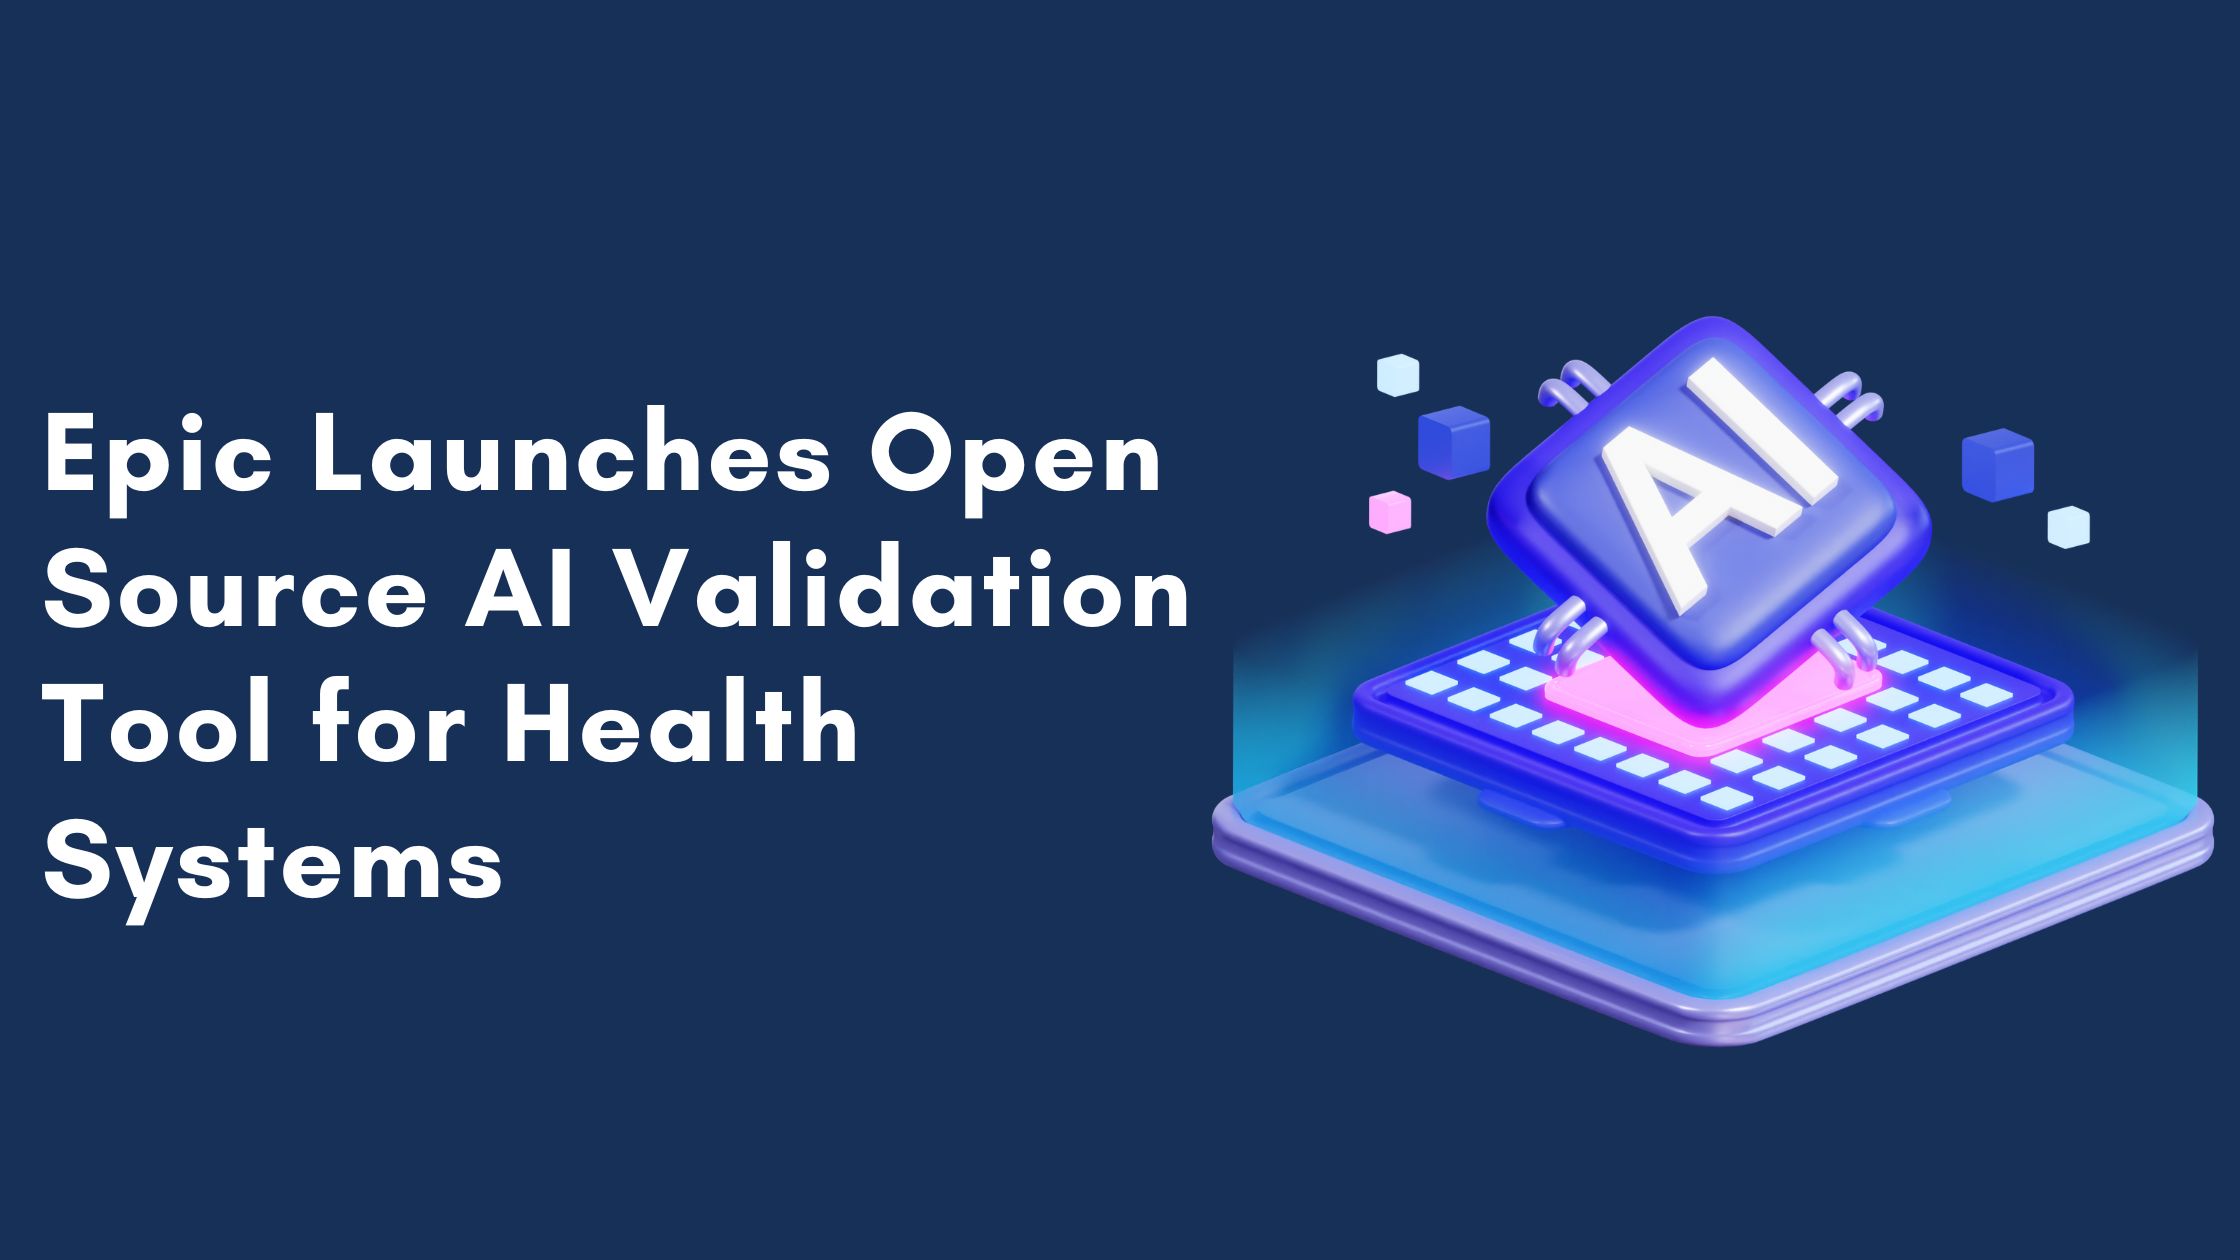 Epic Launches Open-Source AI Validation Tool for Health Systems